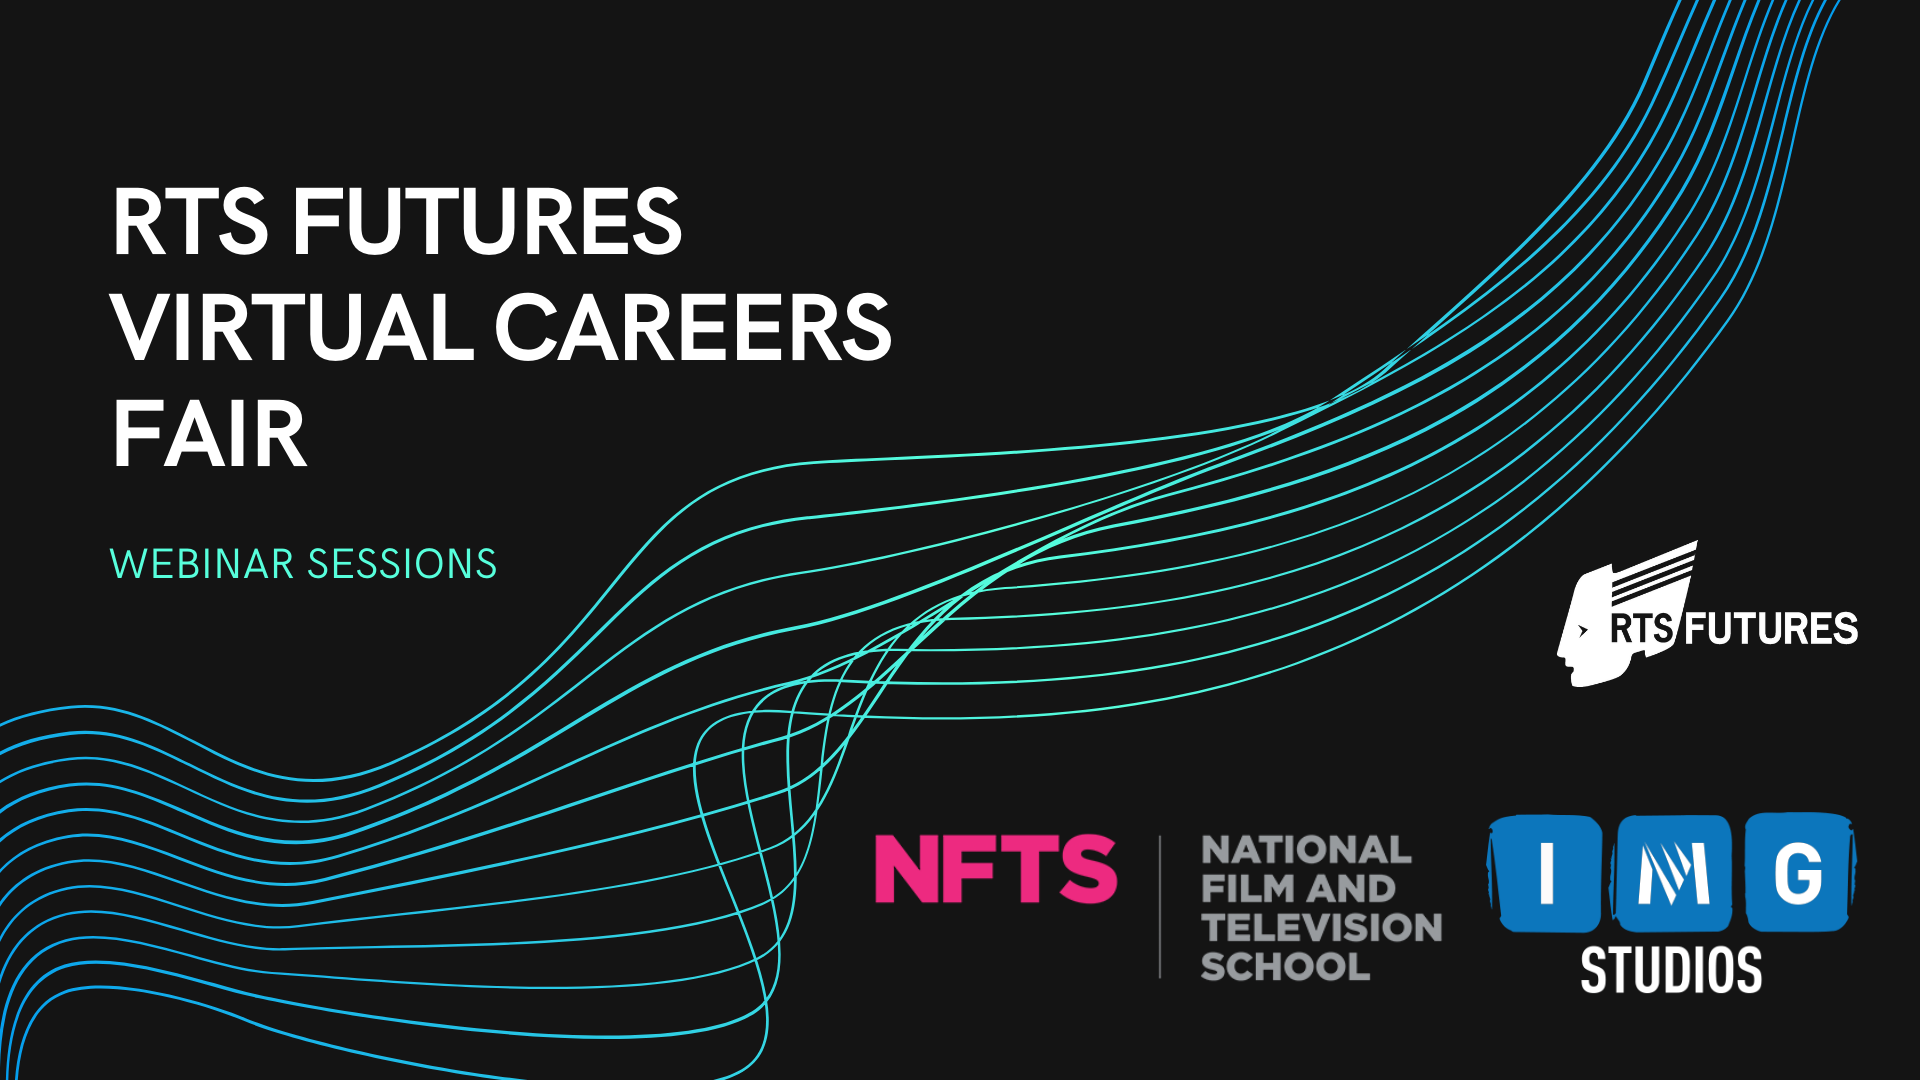 RTS Futures Careers Fair 2021: Session Schedule | Royal Television Society